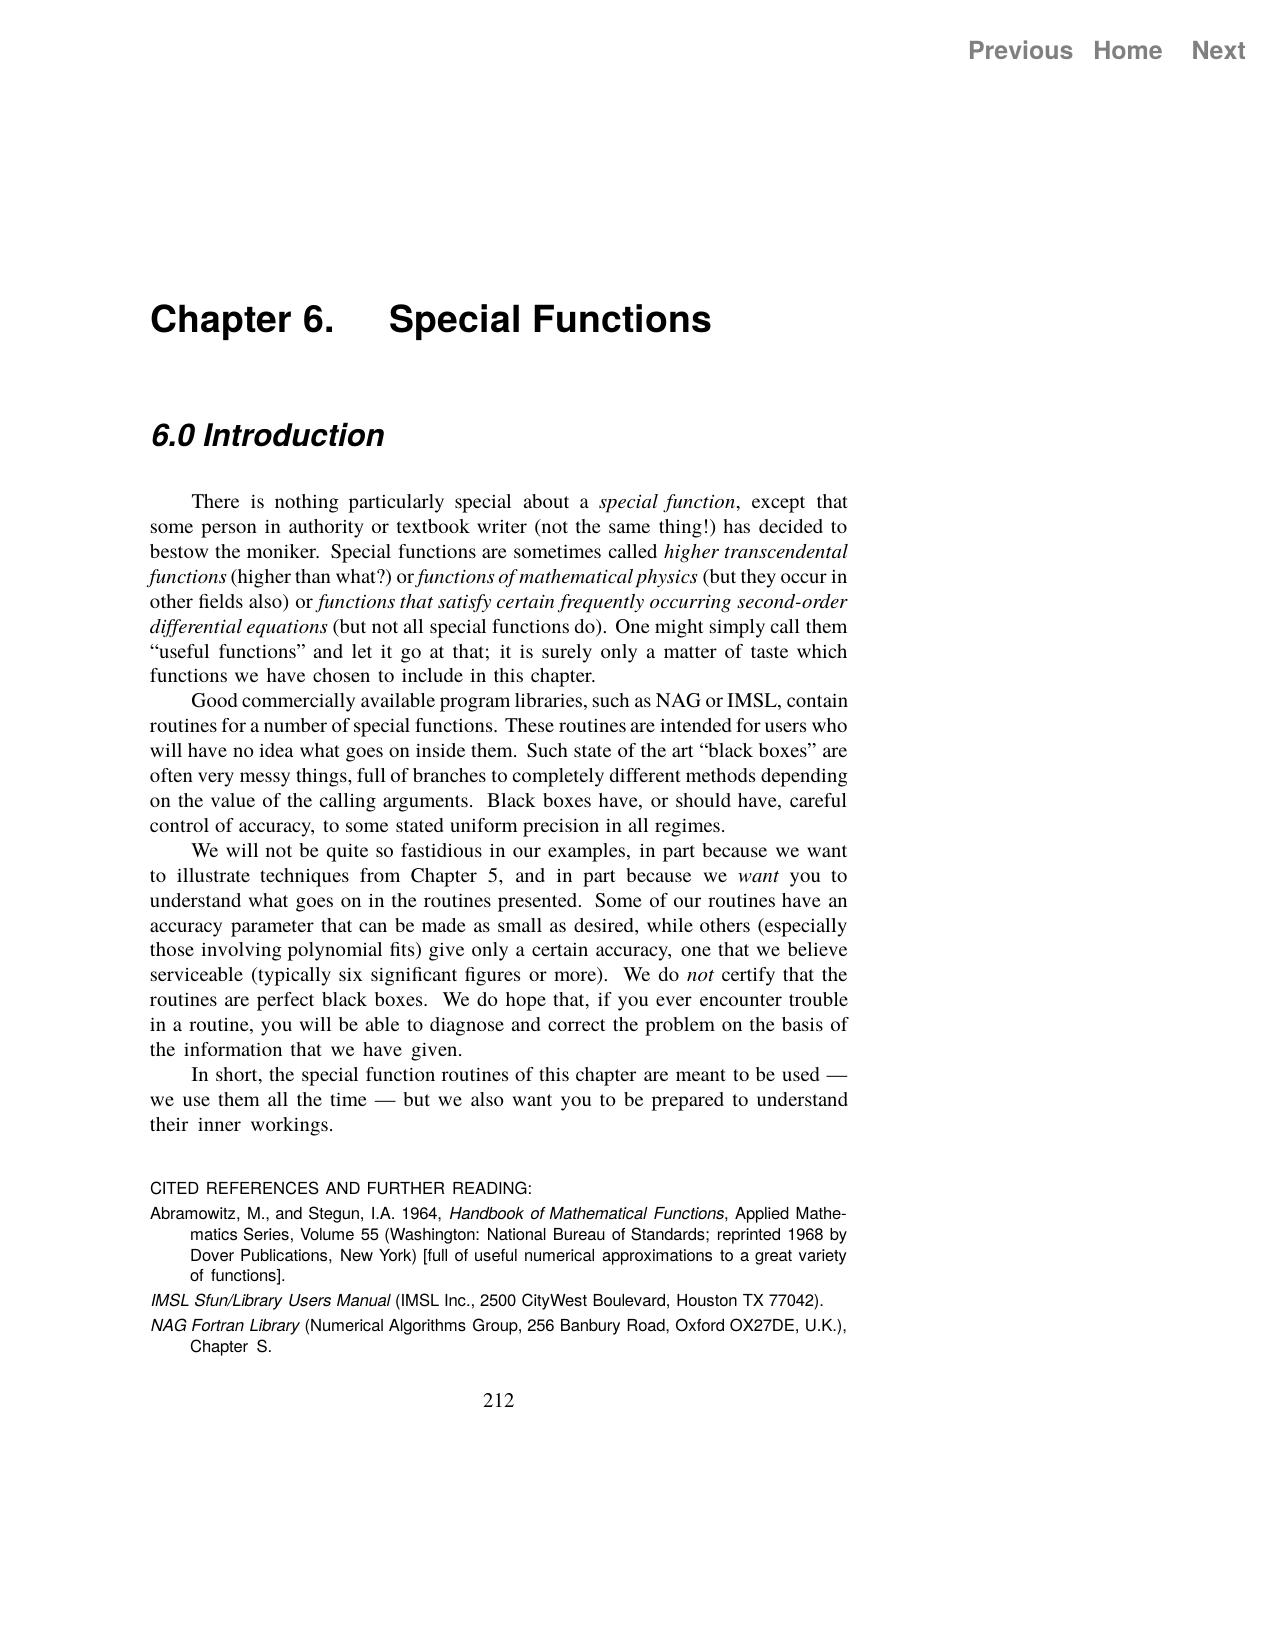 Numerical Recipes in C - Chapter 6. Special Functions by Unknown